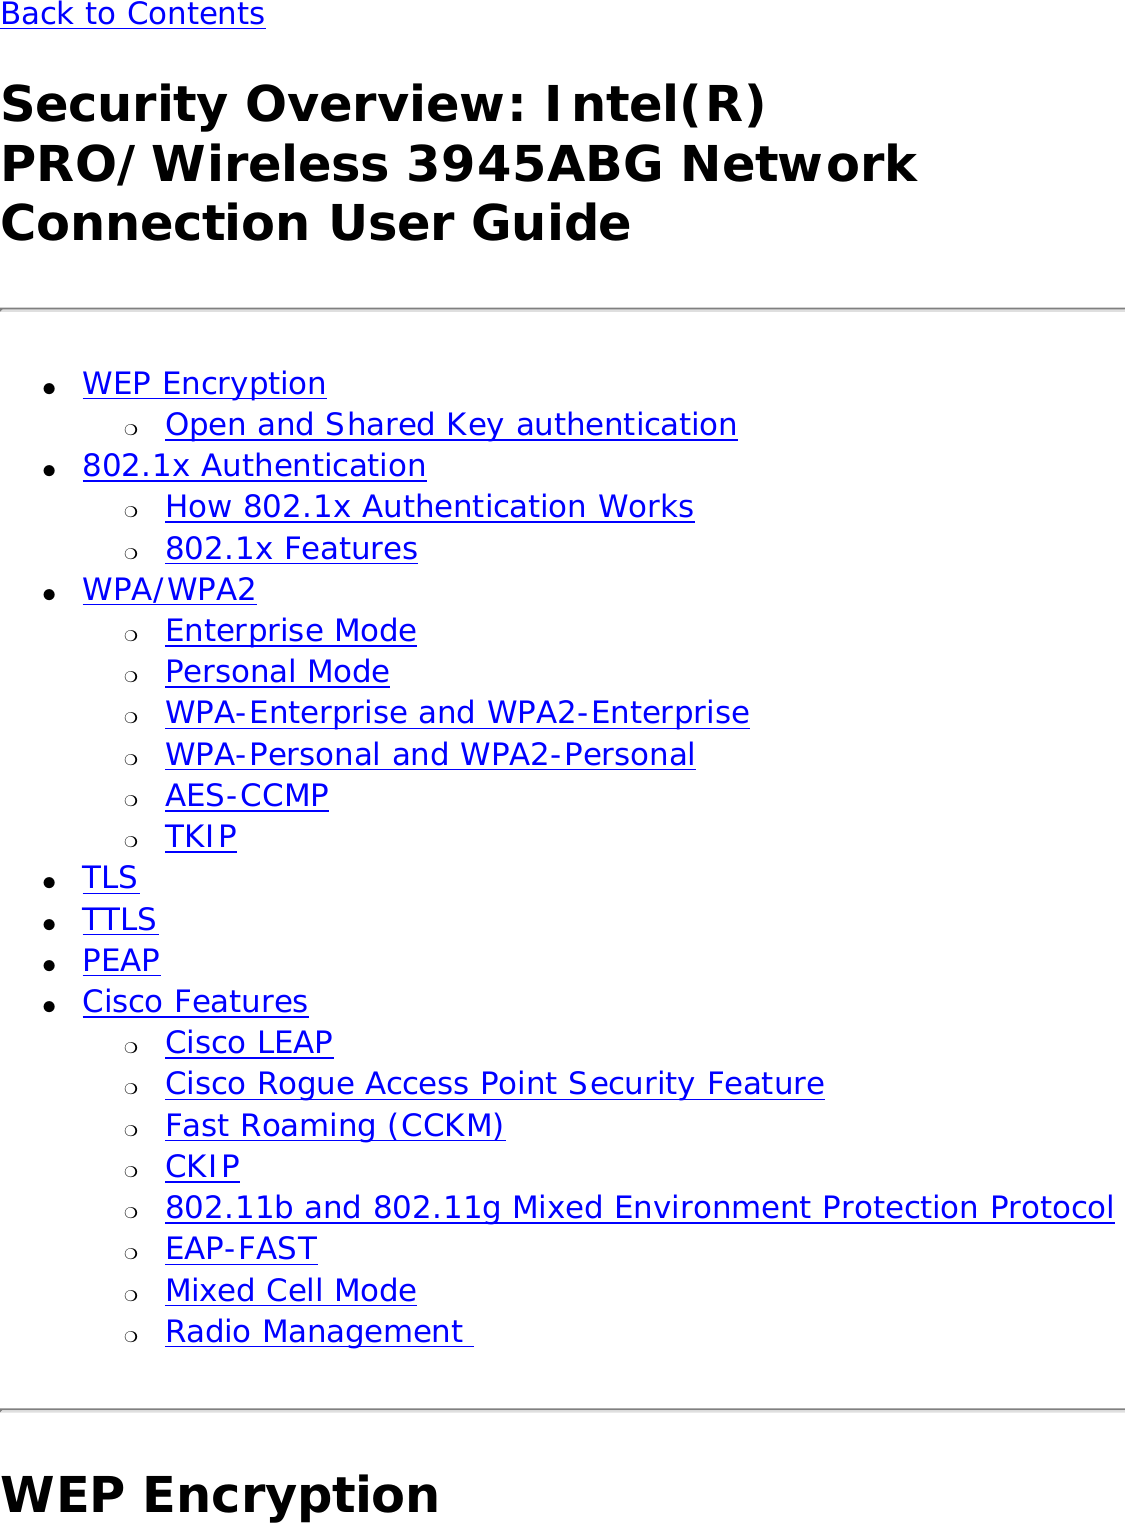 Back to Contents Security Overview: Intel(R) PRO/Wireless 3945ABG Network Connection User Guide●     WEP Encryption ❍     Open and Shared Key authentication●     802.1x Authentication ❍     How 802.1x Authentication Works❍     802.1x Features●     WPA/WPA2 ❍     Enterprise Mode❍     Personal Mode❍     WPA-Enterprise and WPA2-Enterprise ❍     WPA-Personal and WPA2-Personal ❍     AES-CCMP❍     TKIP●     TLS●     TTLS●     PEAP●     Cisco Features ❍     Cisco LEAP❍     Cisco Rogue Access Point Security Feature❍     Fast Roaming (CCKM)❍     CKIP❍     802.11b and 802.11g Mixed Environment Protection Protocol❍     EAP-FAST❍     Mixed Cell Mode❍     Radio Management WEP Encryption